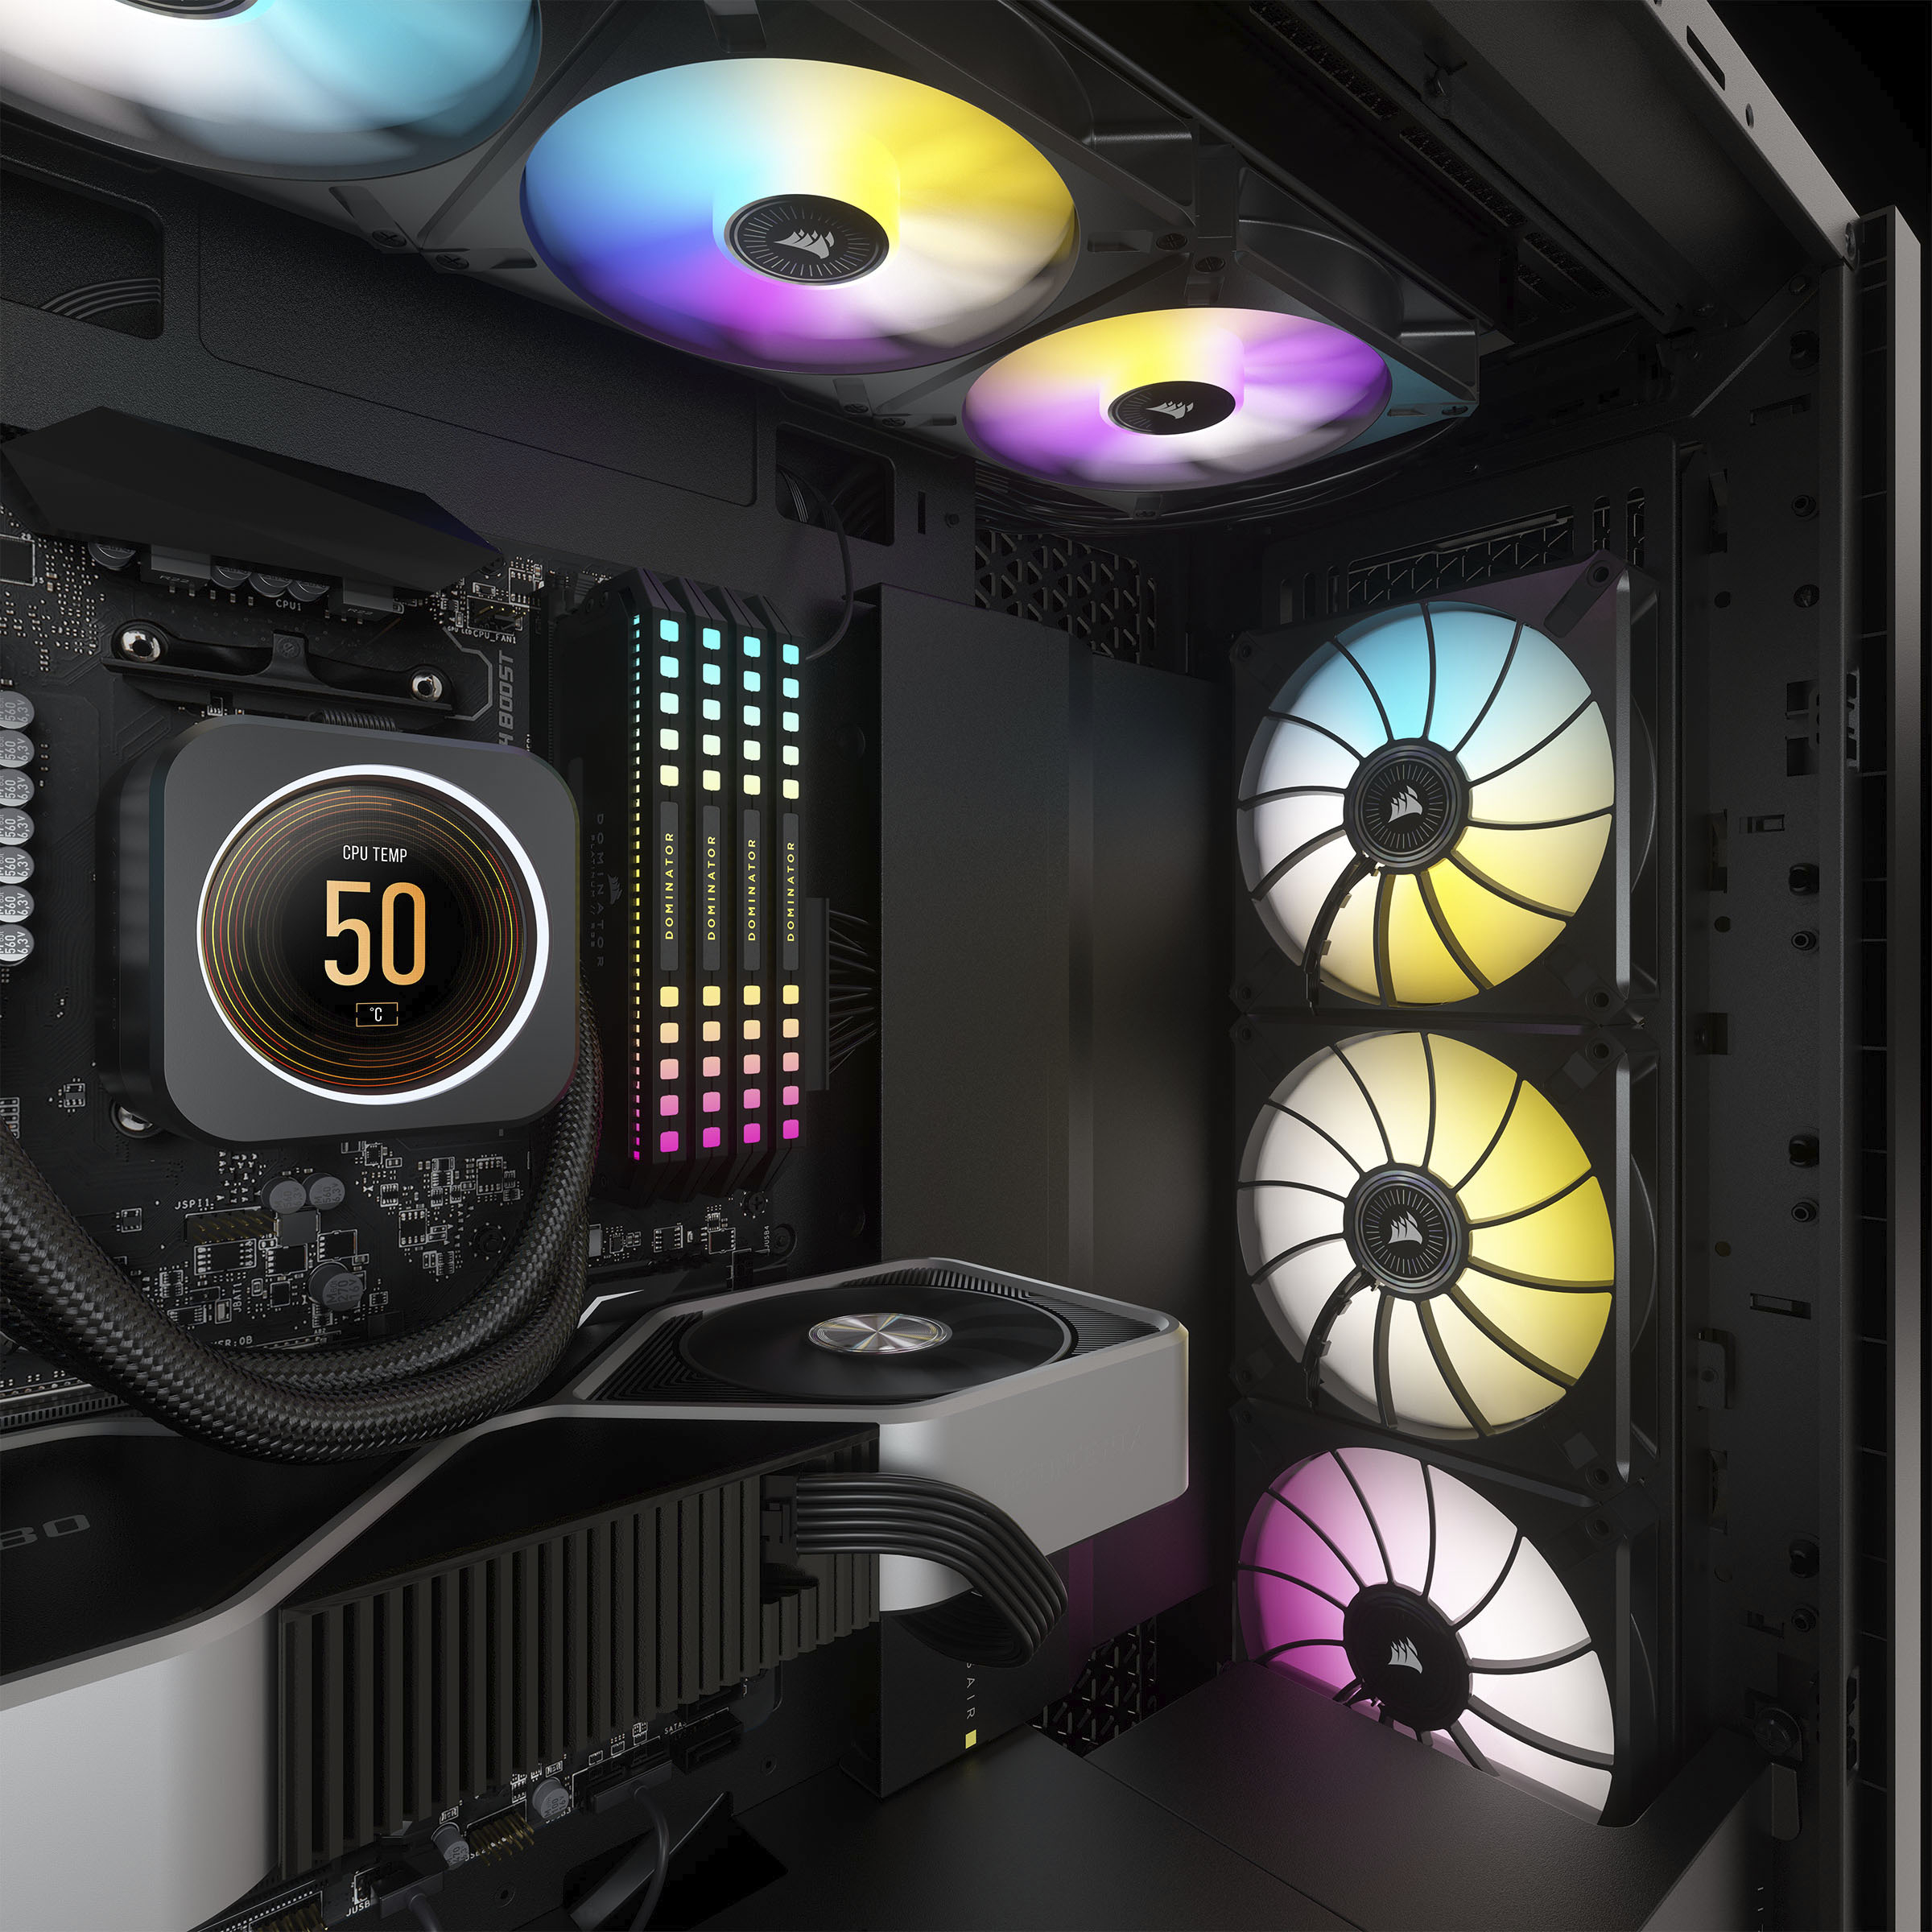 CORSAIR Announces New LCD-Equipped AIO CPU Coolers for the iCUE